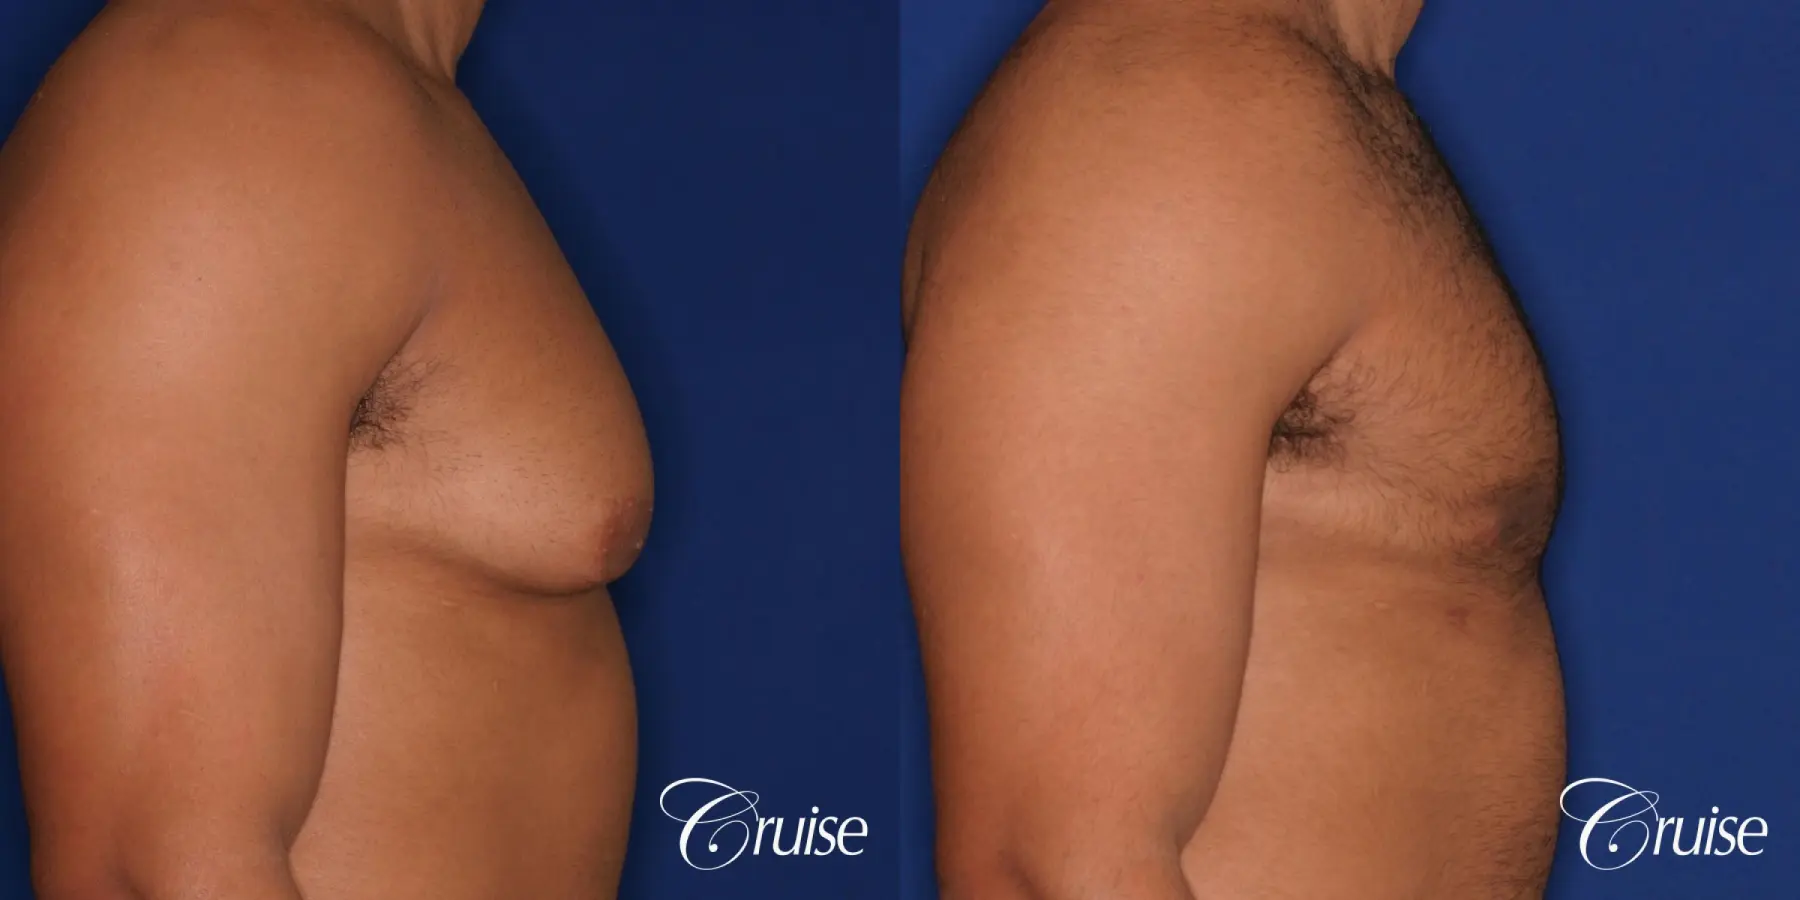 26 yo athletic patient with moderate gynecomastia - Before and After 3